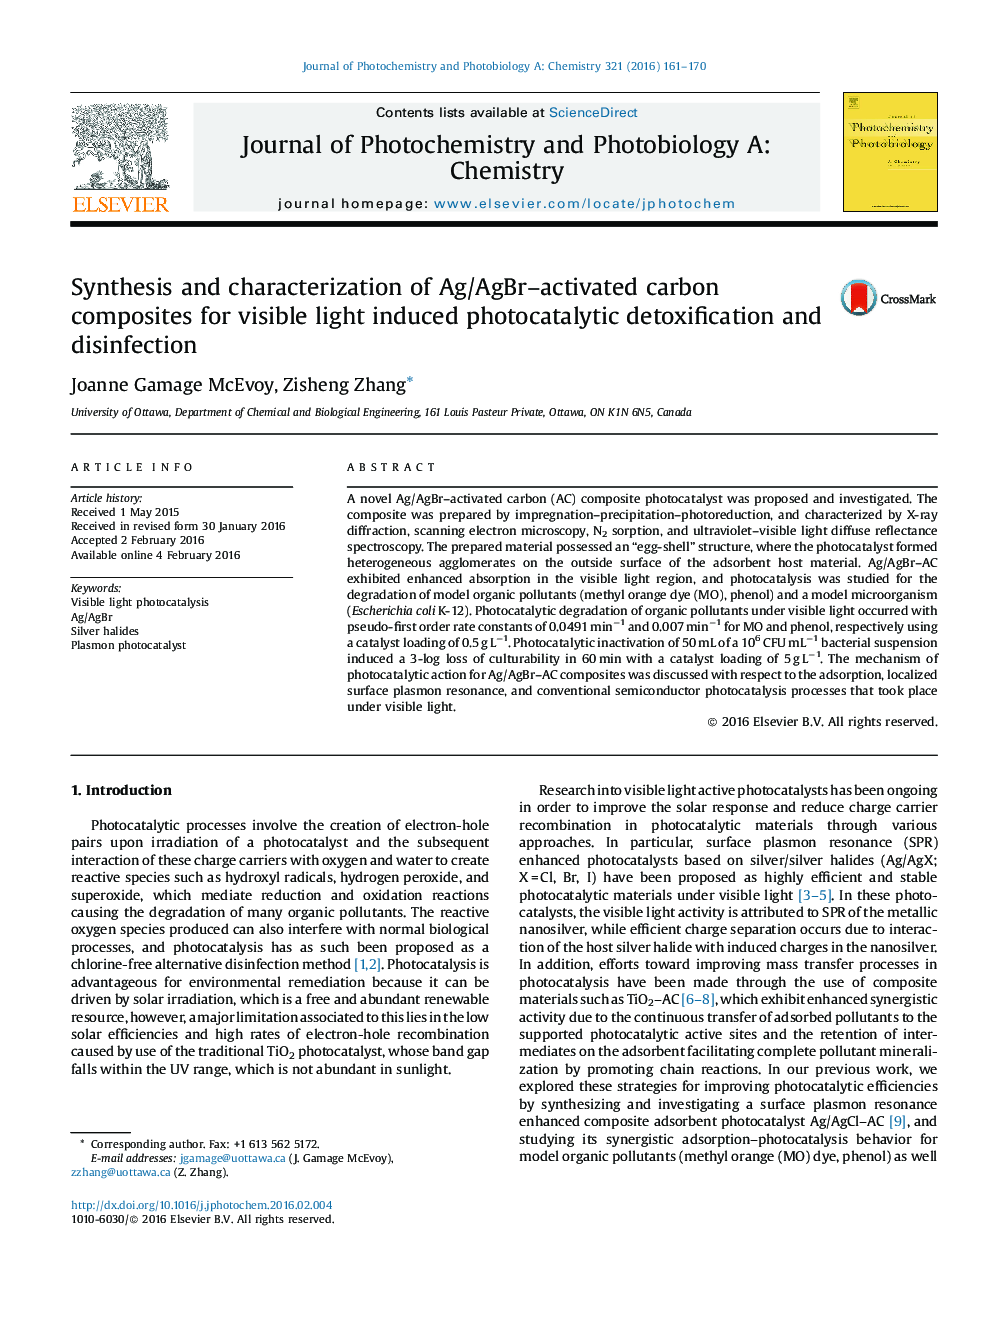 Synthesis and characterization of Ag/AgBr–activated carbon composites for visible light induced photocatalytic detoxification and disinfection